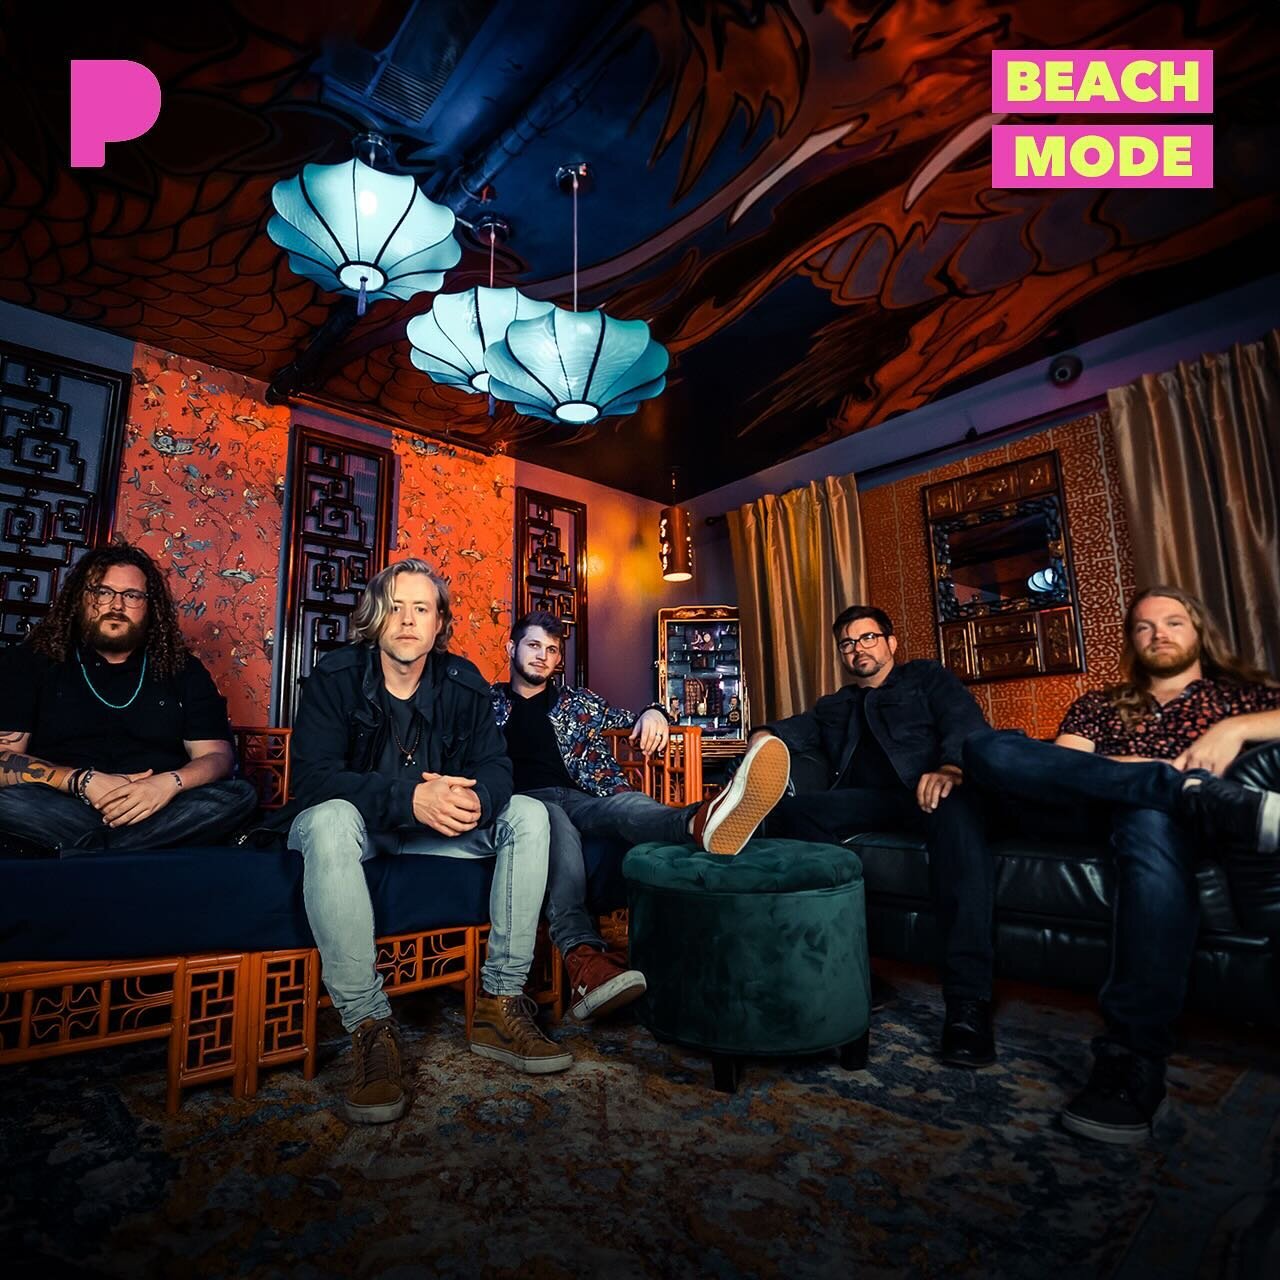 Big love to @pandora for adding our new single &lsquo;An Island Still Remains&rsquo; on their #BeachMode station + putting us on the cover ! Hope y&rsquo;all diggin the new tunes :)